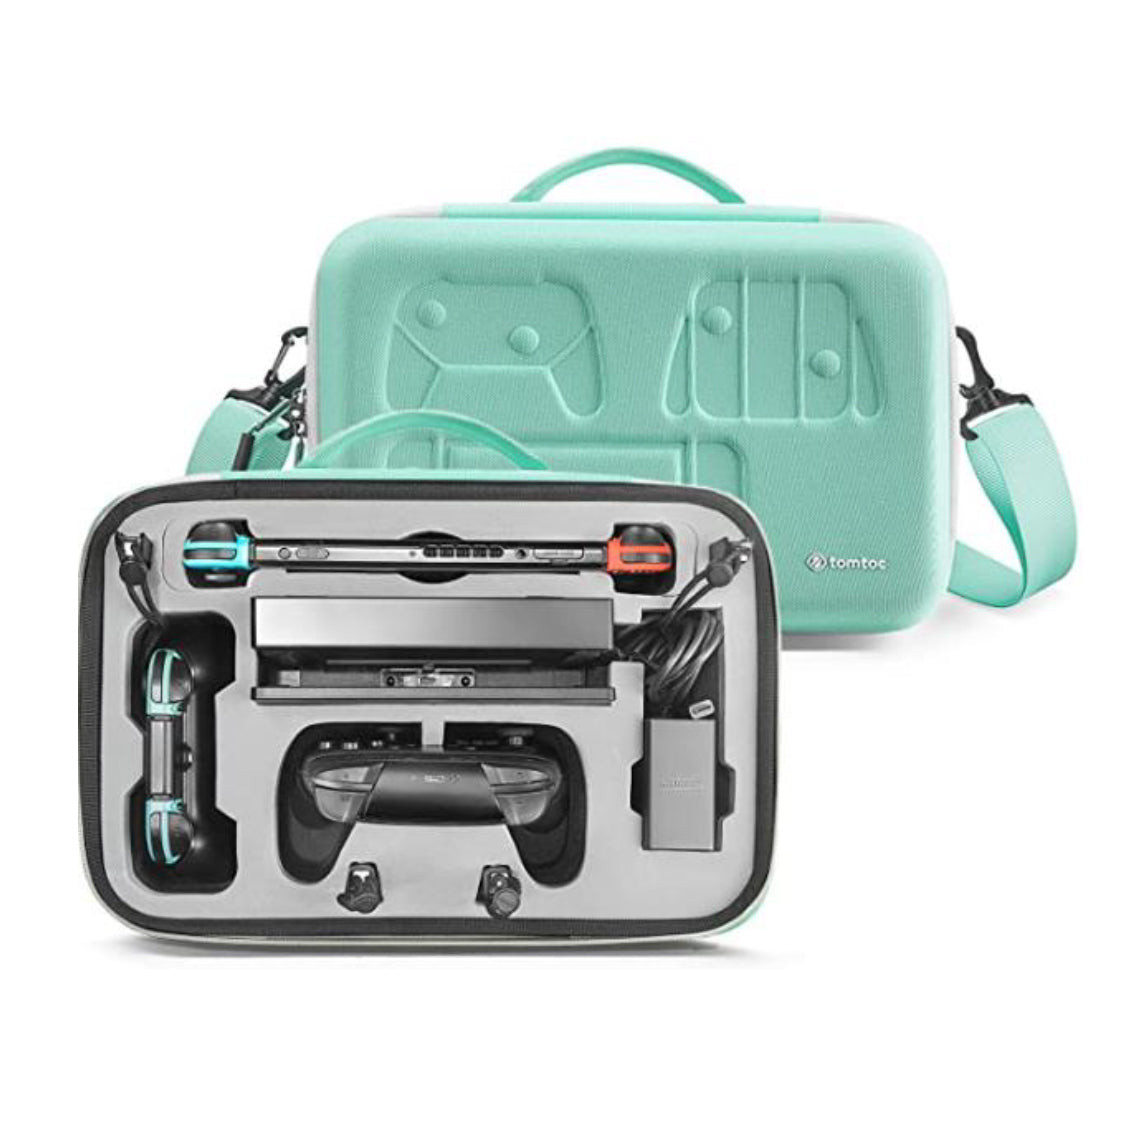 Tomtoc NS Storage Case (Green) A05-6T01